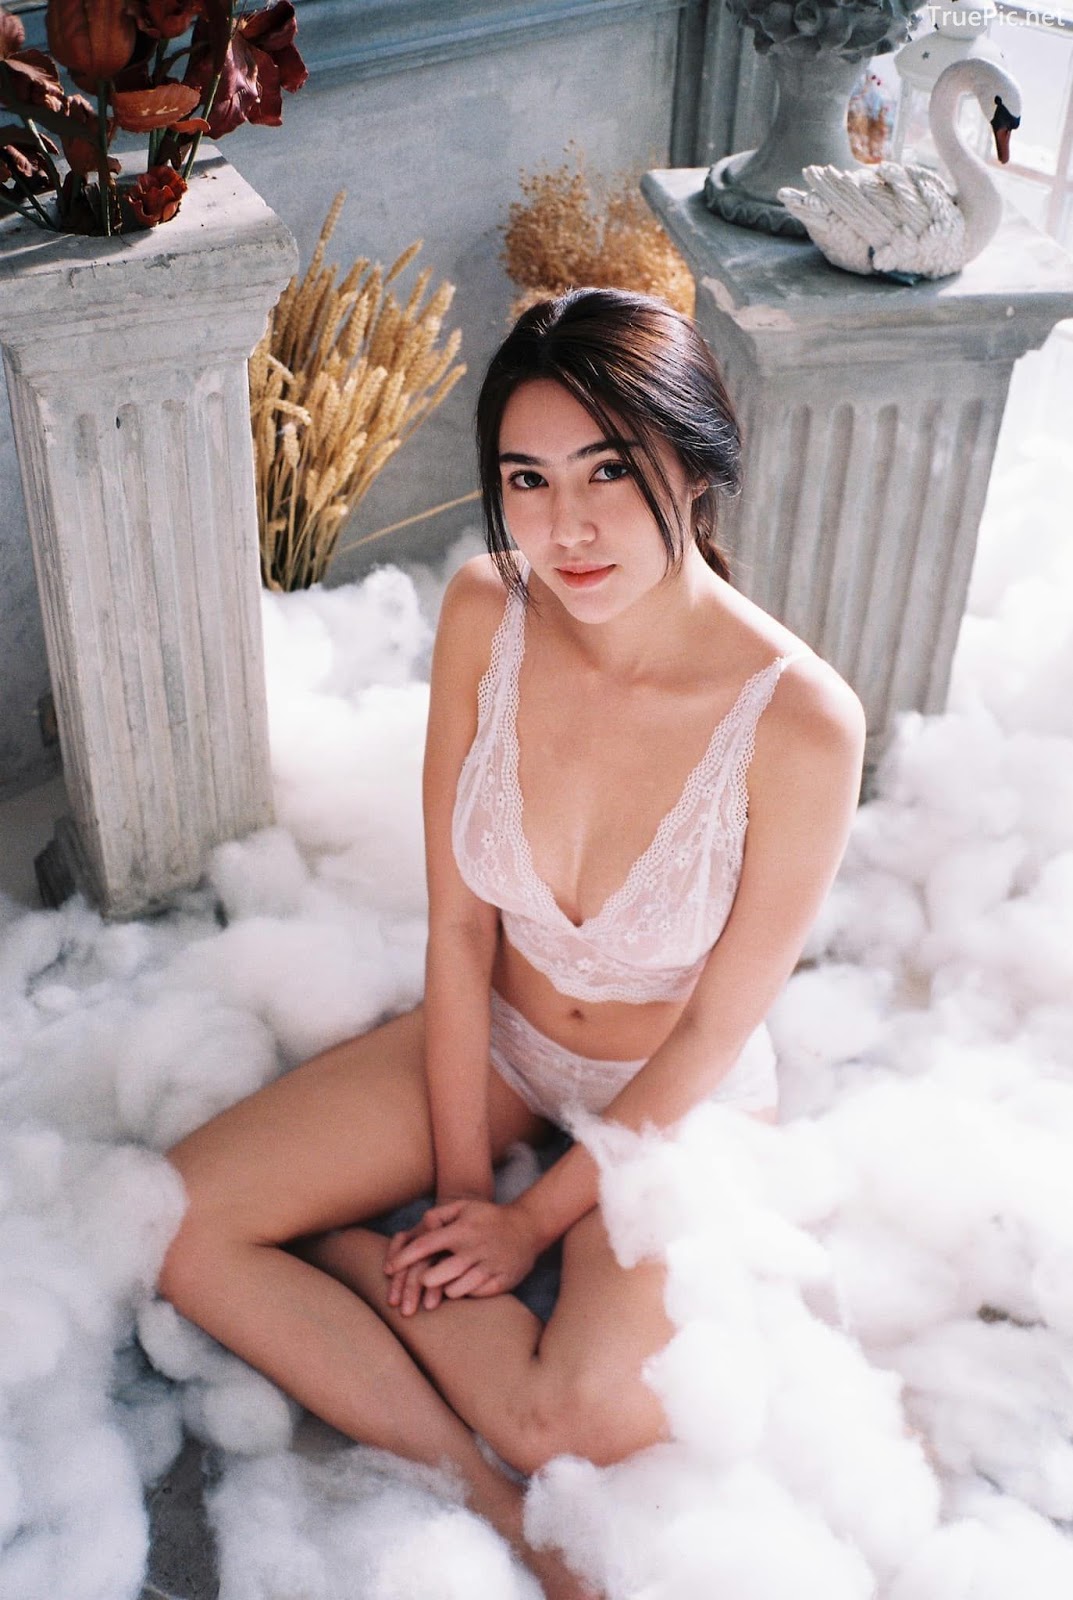 Thailand Hot model - Baifern Rinrucha Kamnark - Sexy in Transparent Lace Lingerie - TruePic.net - Picture 25